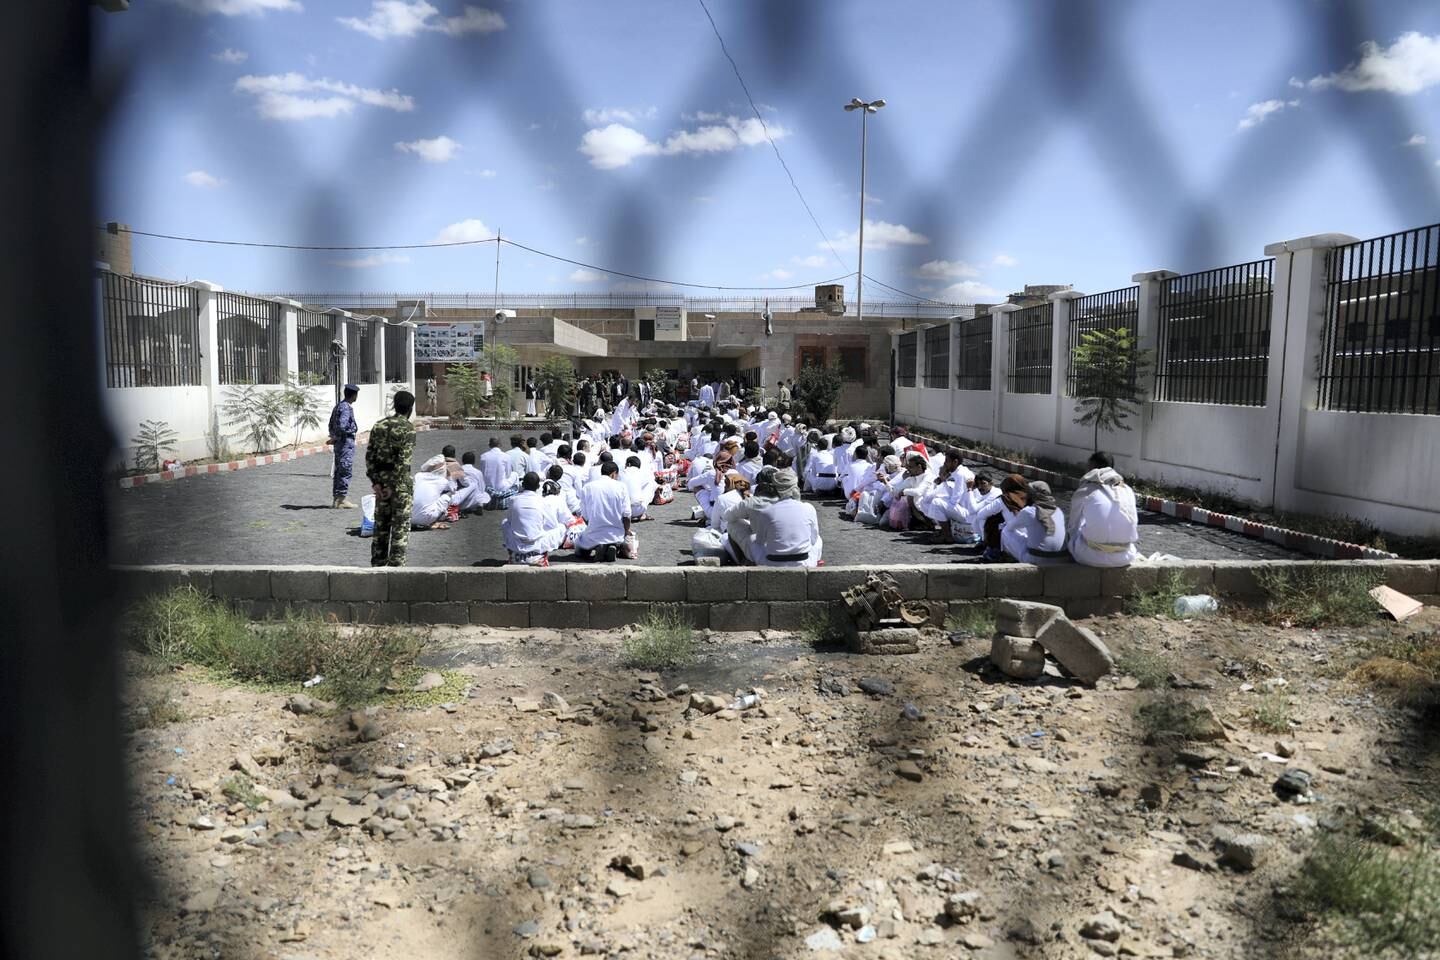 Detainees wait for their release by the Houthis at the central prison of Sanaa, Yemen September 30, 2019. REUTERS/Khaled Abdullah